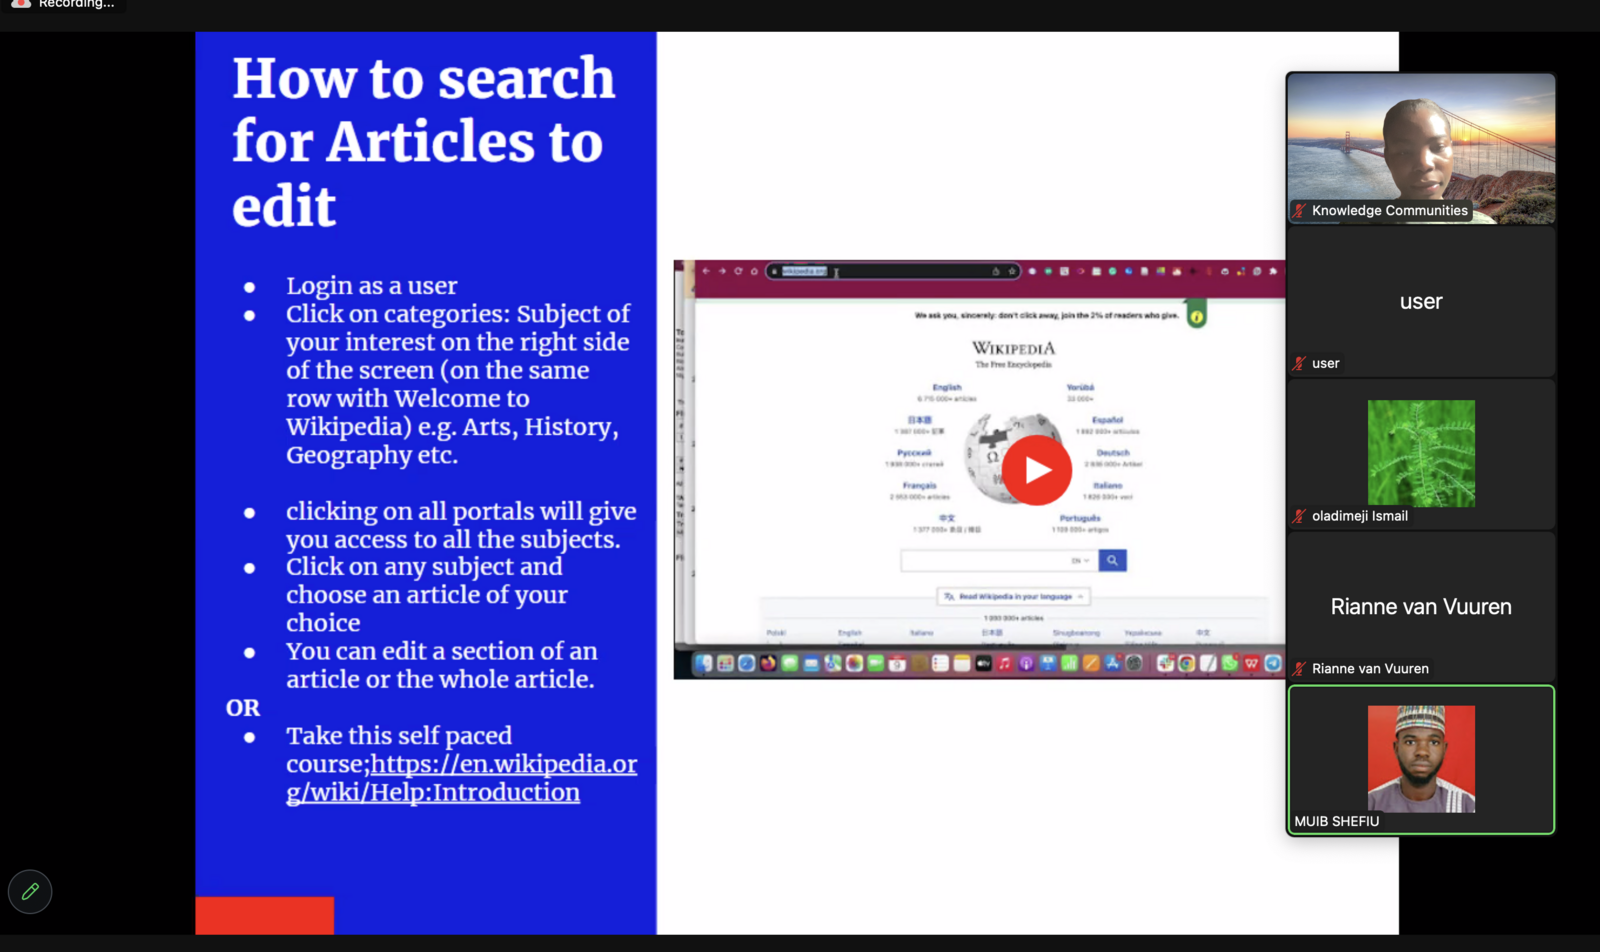 How to search for articles to edit